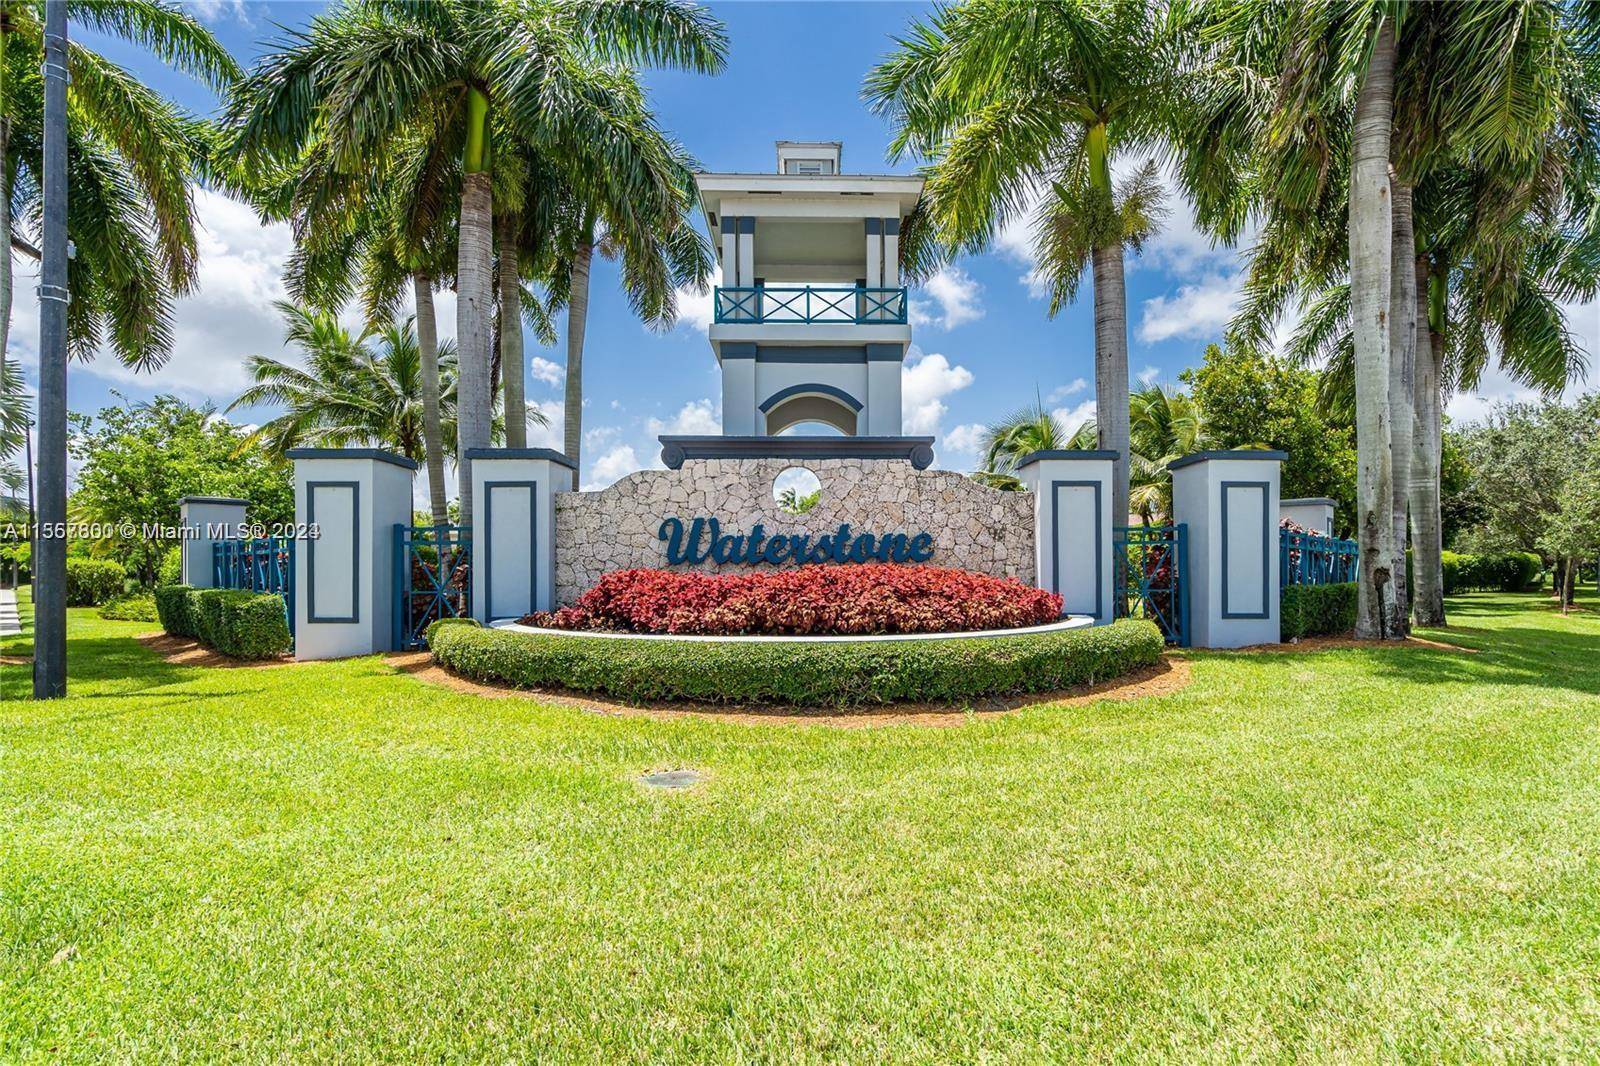 Welcome to your dream home in the prestigious Waterstone community !